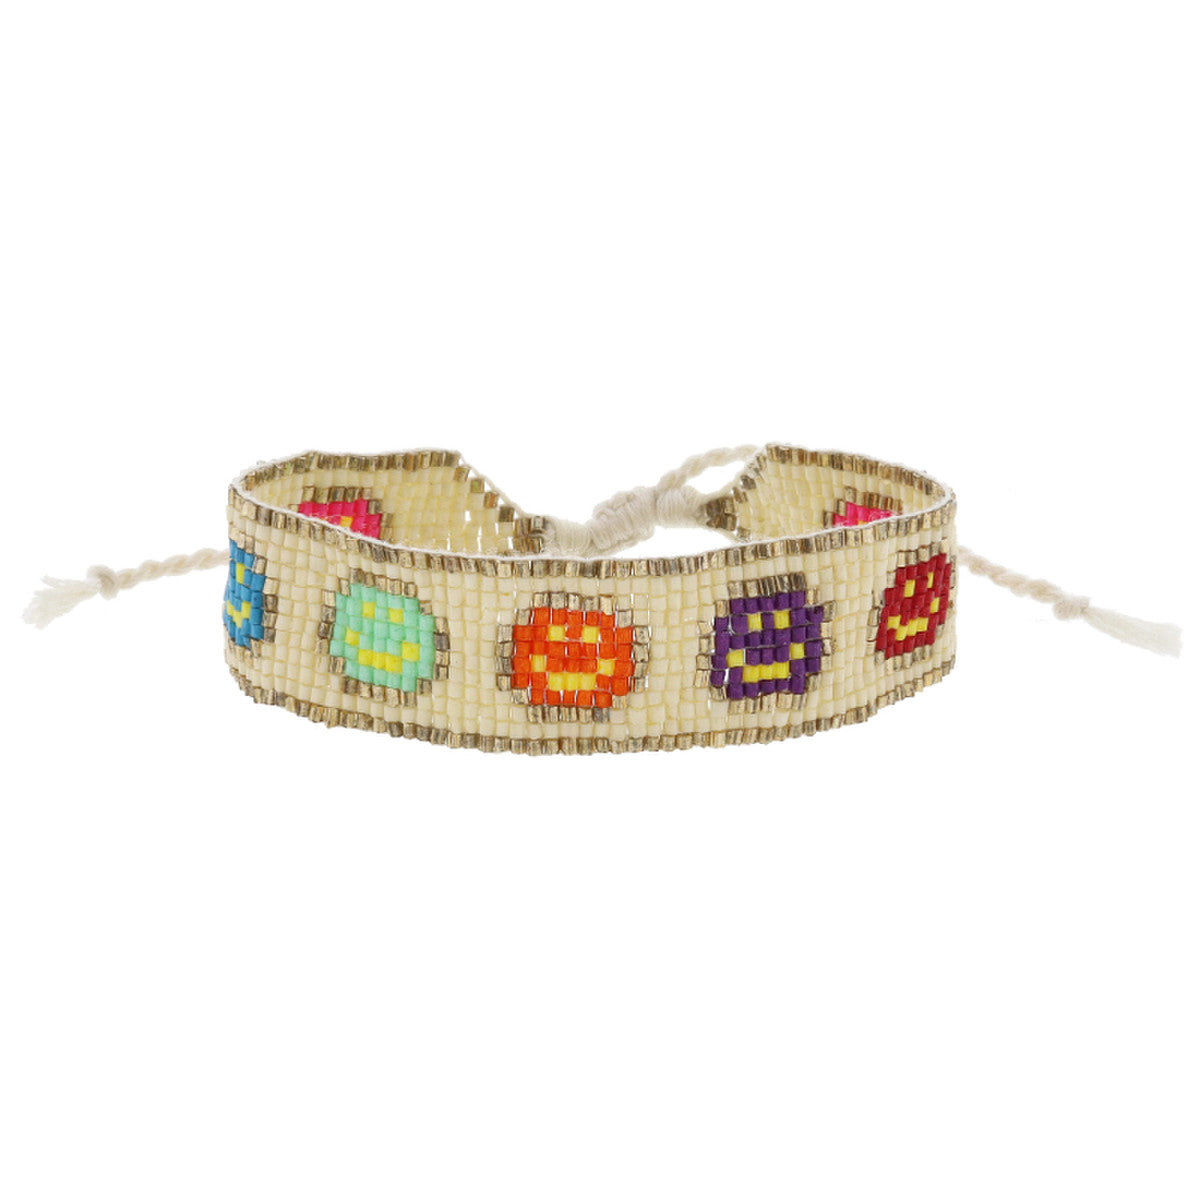 Ivory with Gold and Multi Happy Faces Beaded Band Bracelet